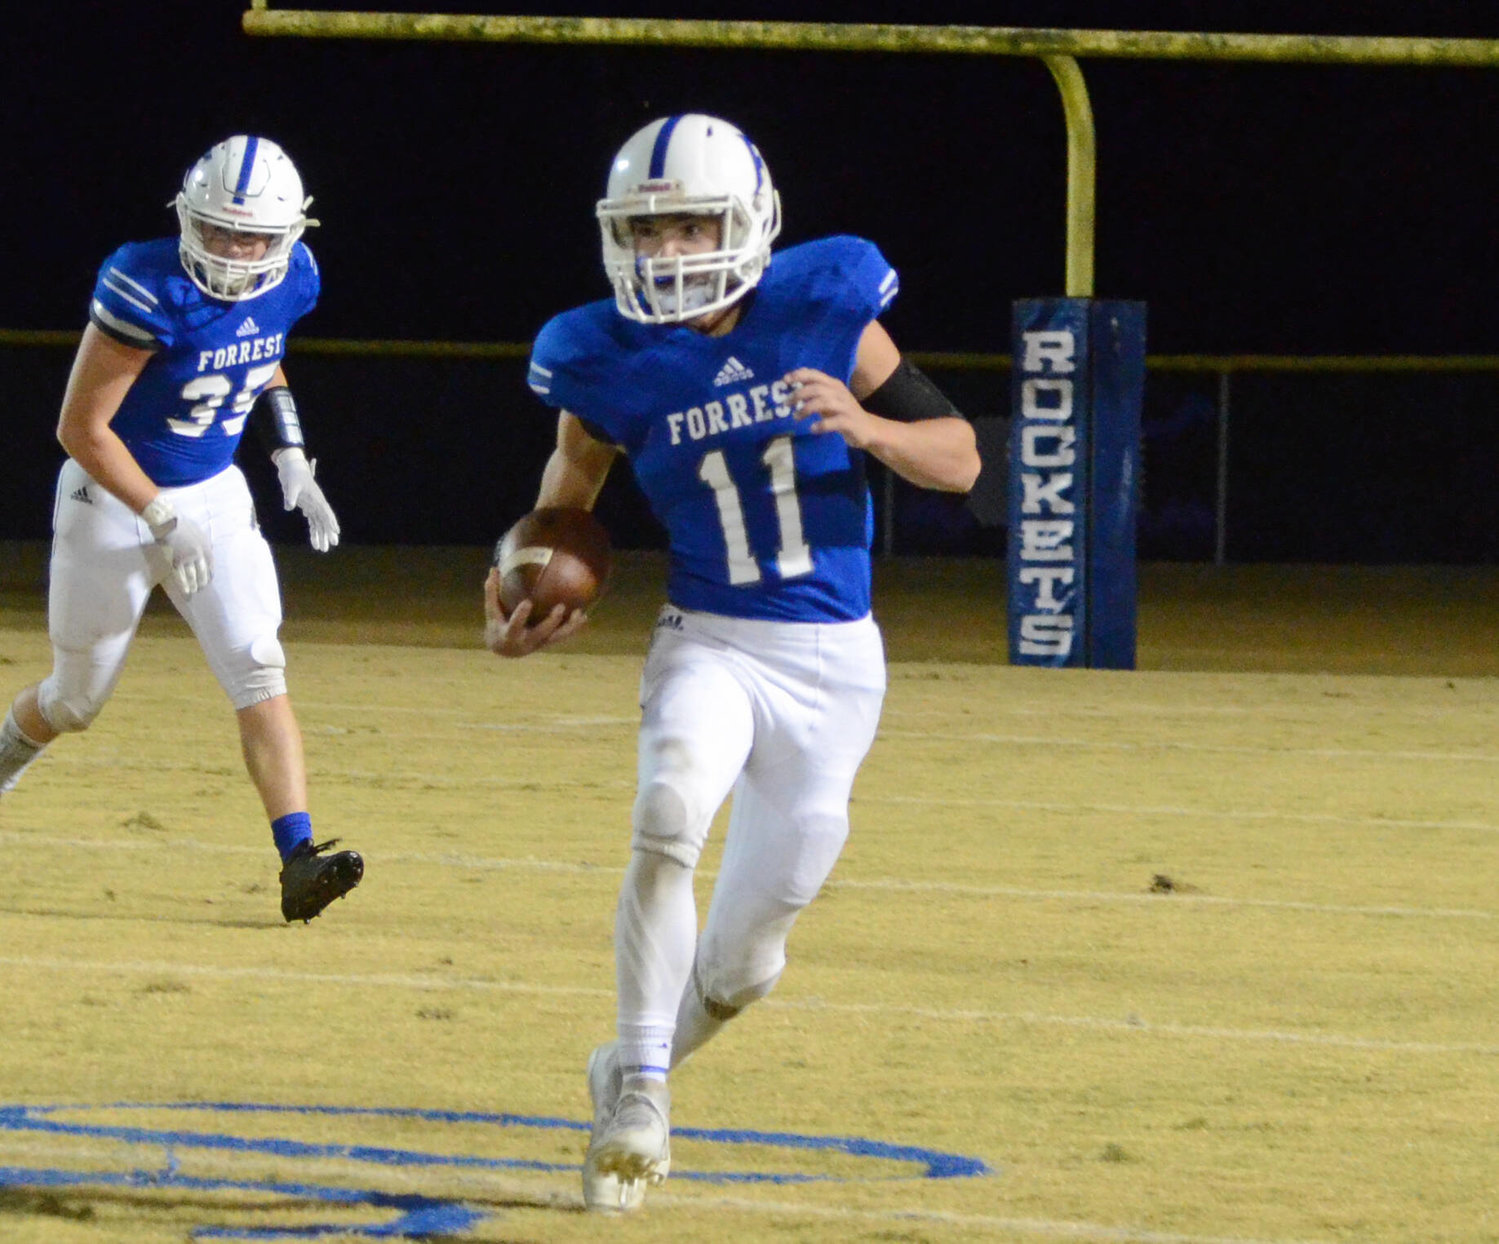 Brenton Burchell (11) comes up with a nice punt return to give the Rockets good field position in the second quarter.